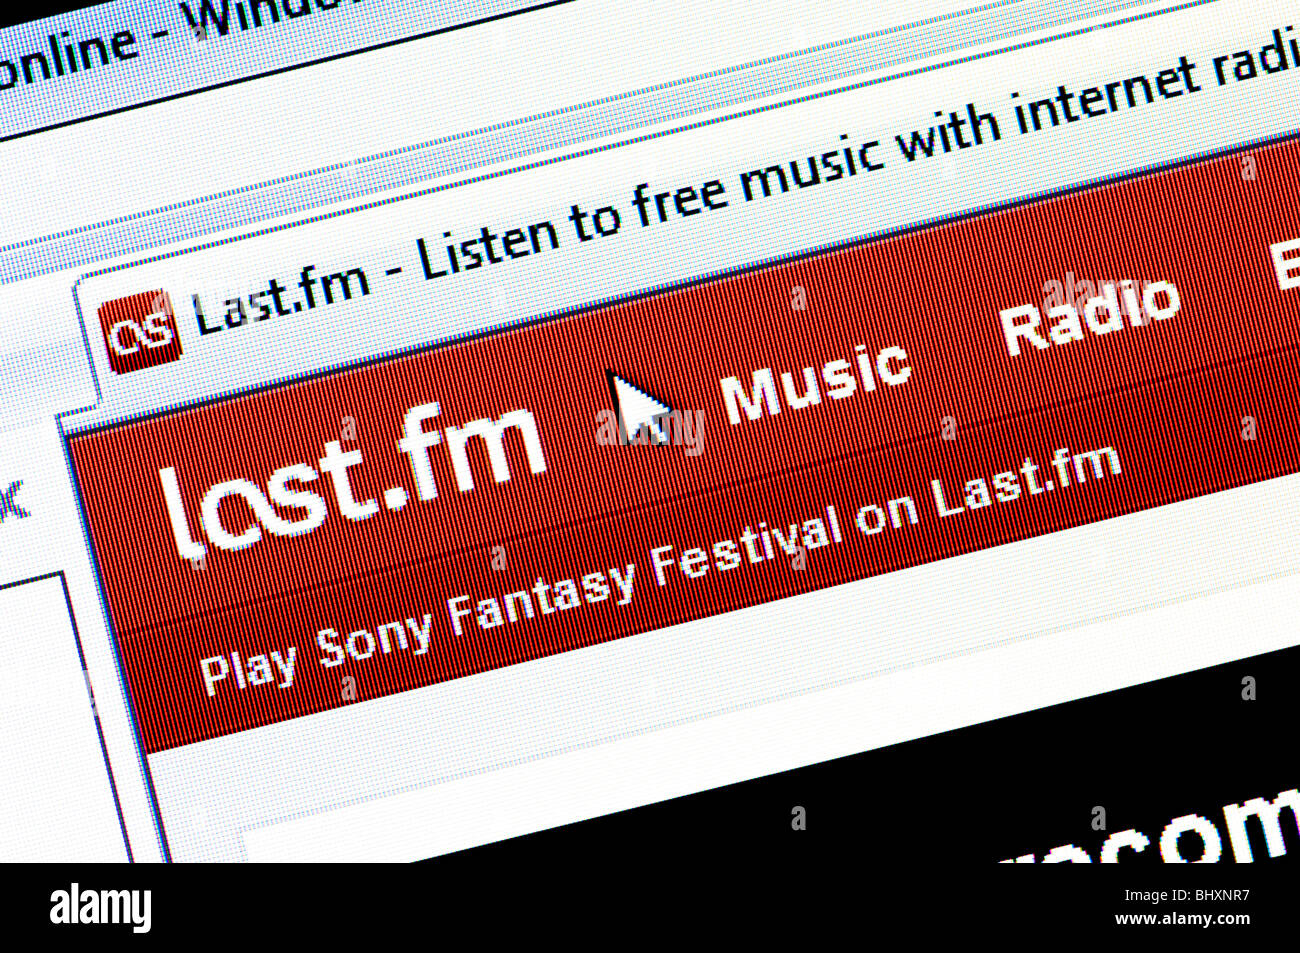 Macro screenshot of the Last.fm website - the internet music radio and social networking site. Editorial use only. Stock Photo